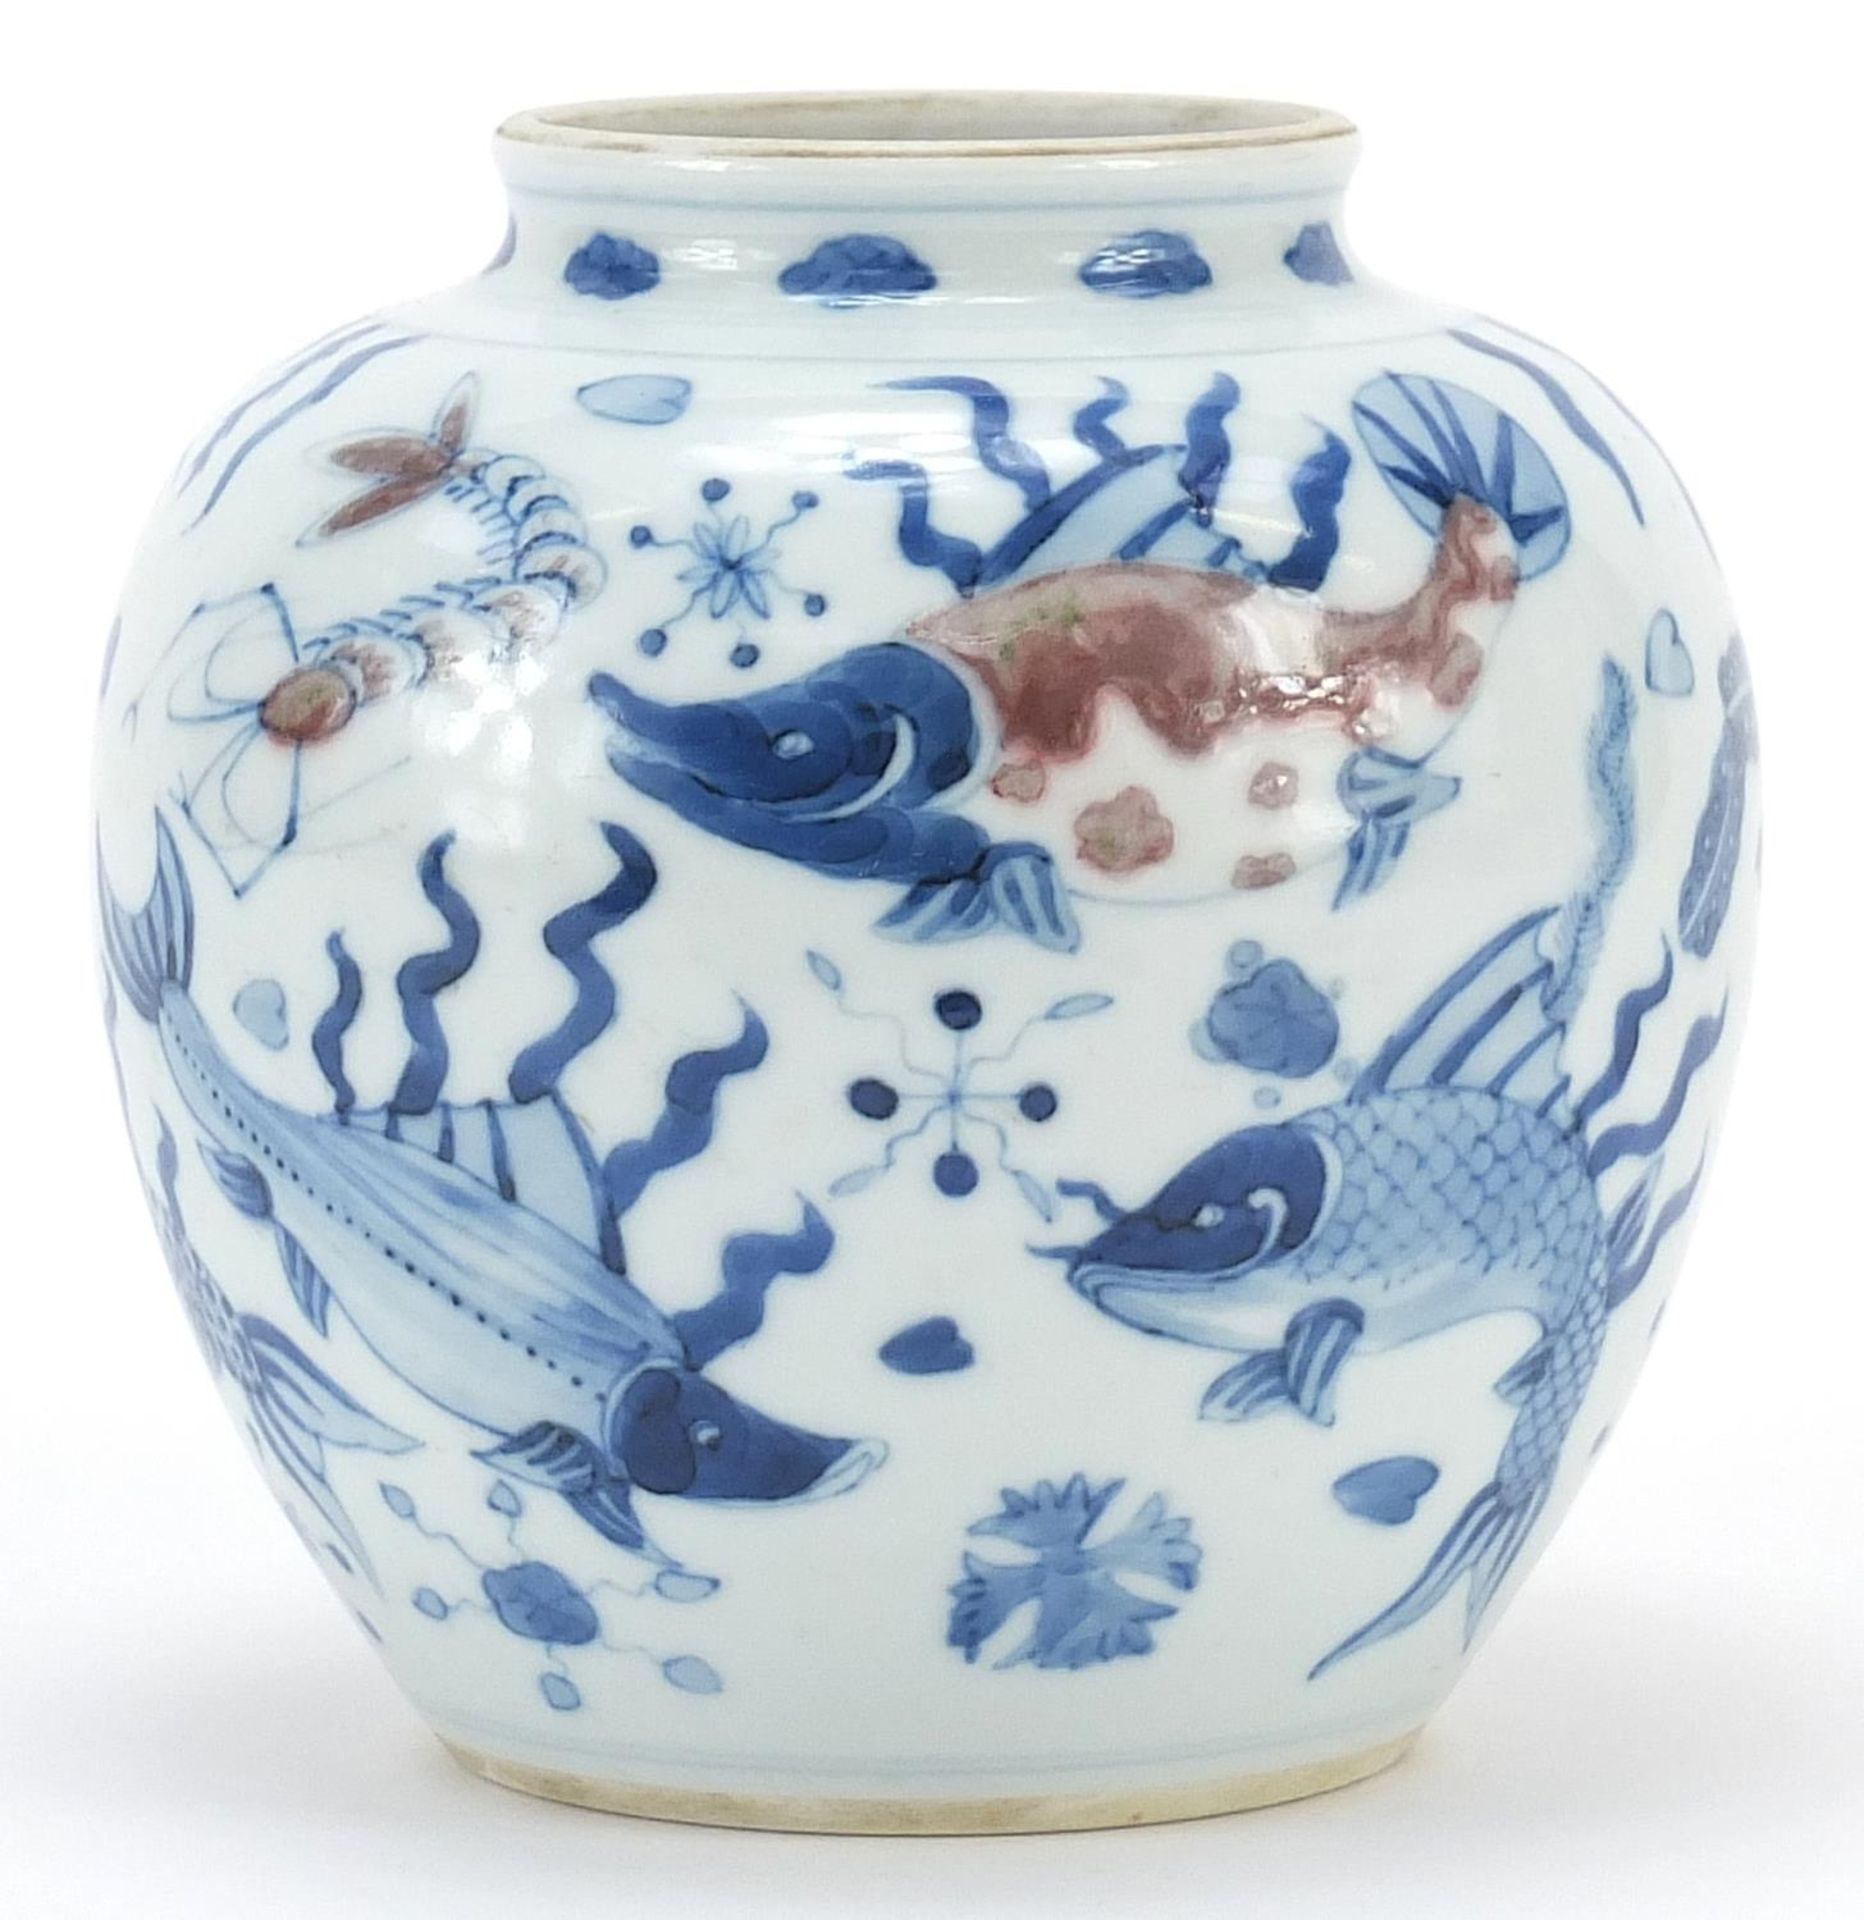 Chinese blue and white with iron red porcelain vase hand painted with fish amongst aquatic life, six